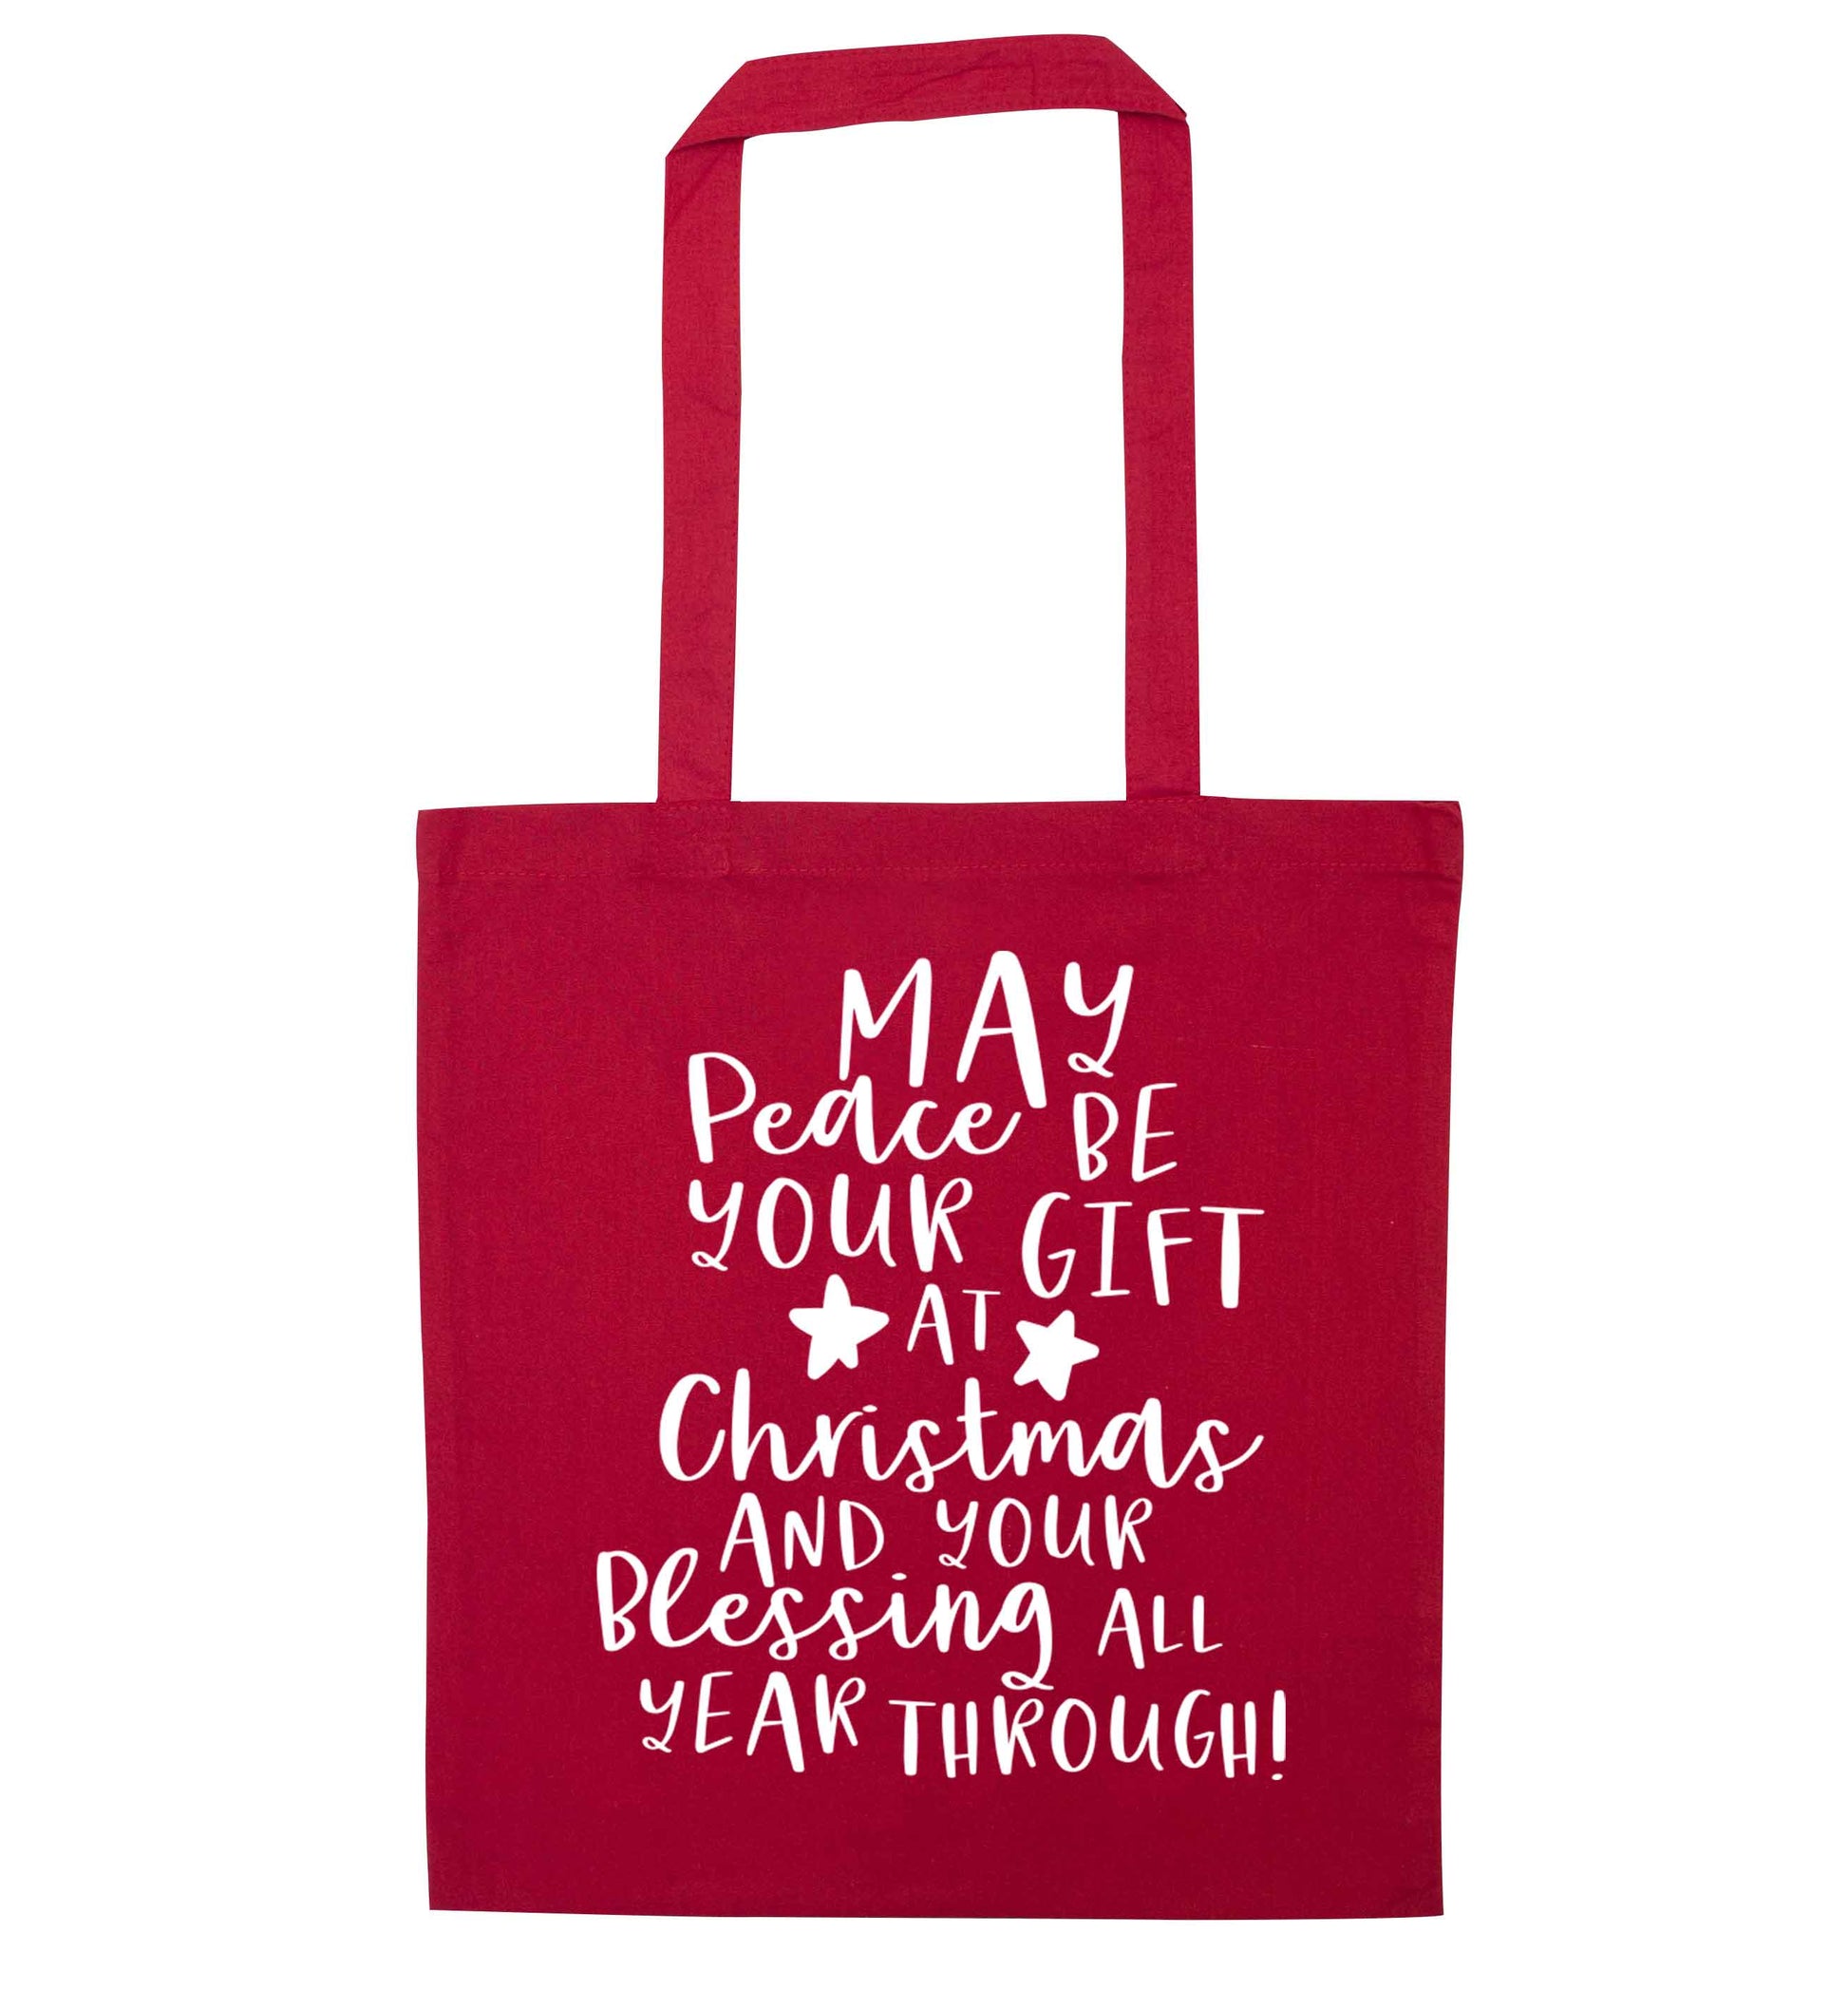 Peace be your Gift at Christmas Gift red tote bag